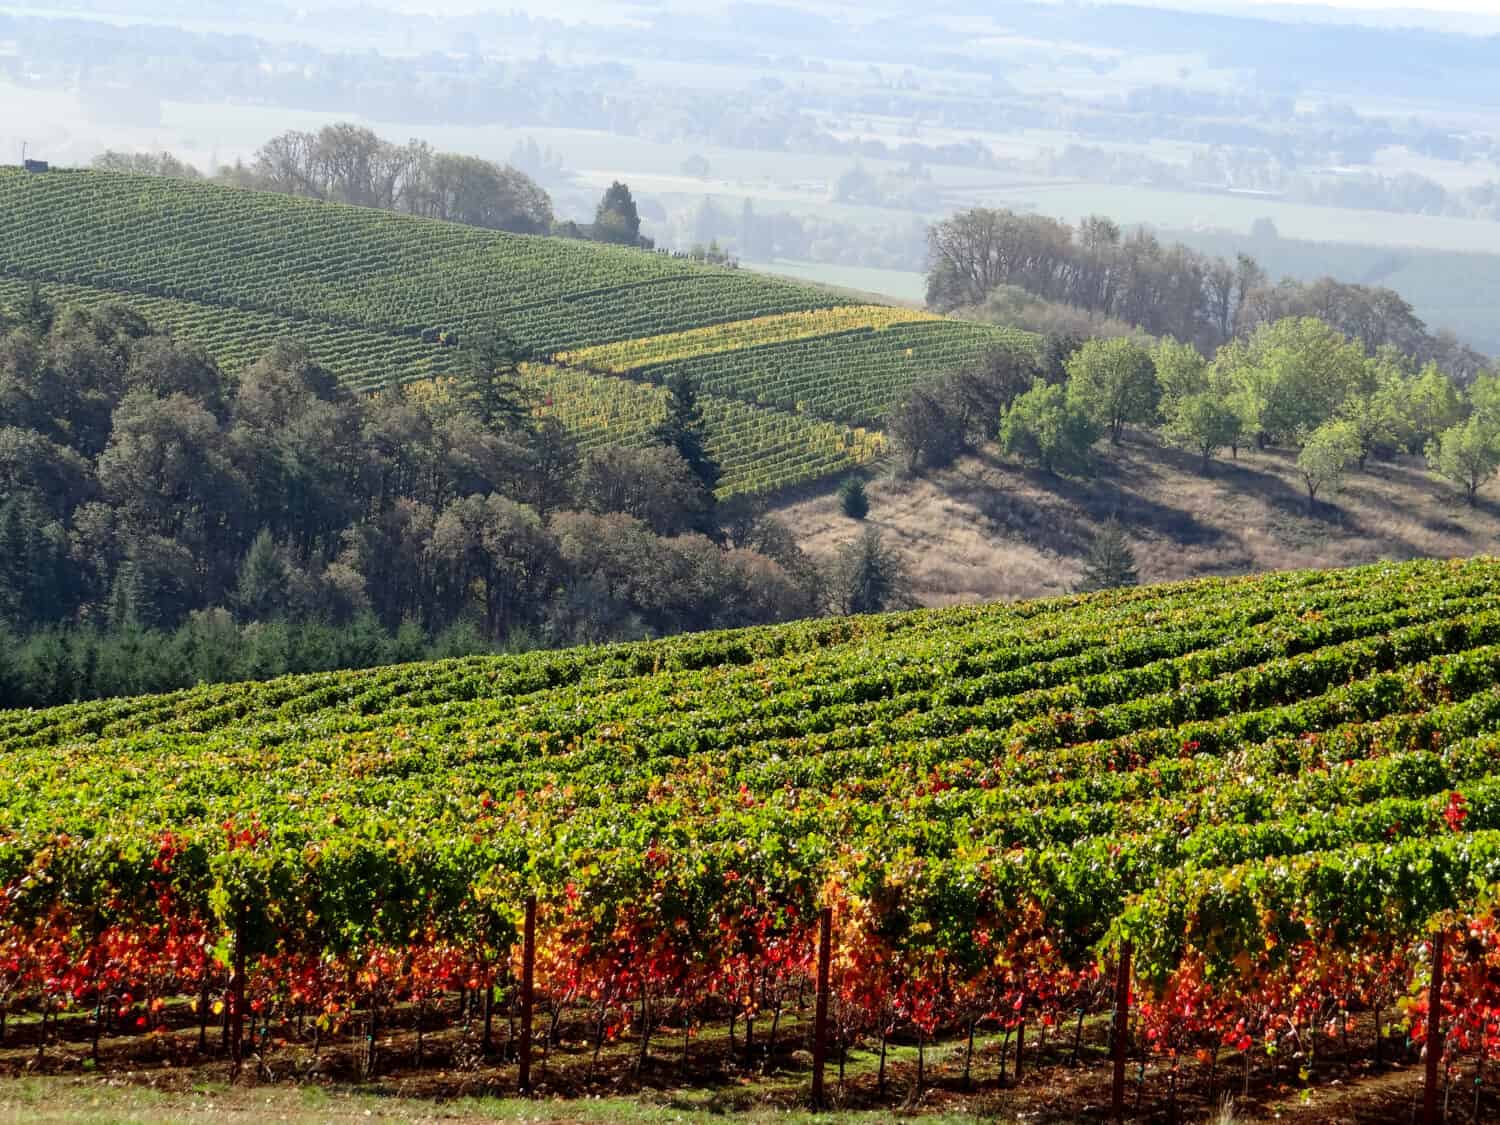 Vines in vineyard rows shift into fall colors, with layers of vines on the hill behind, an Oregon landscape falls away in the background.